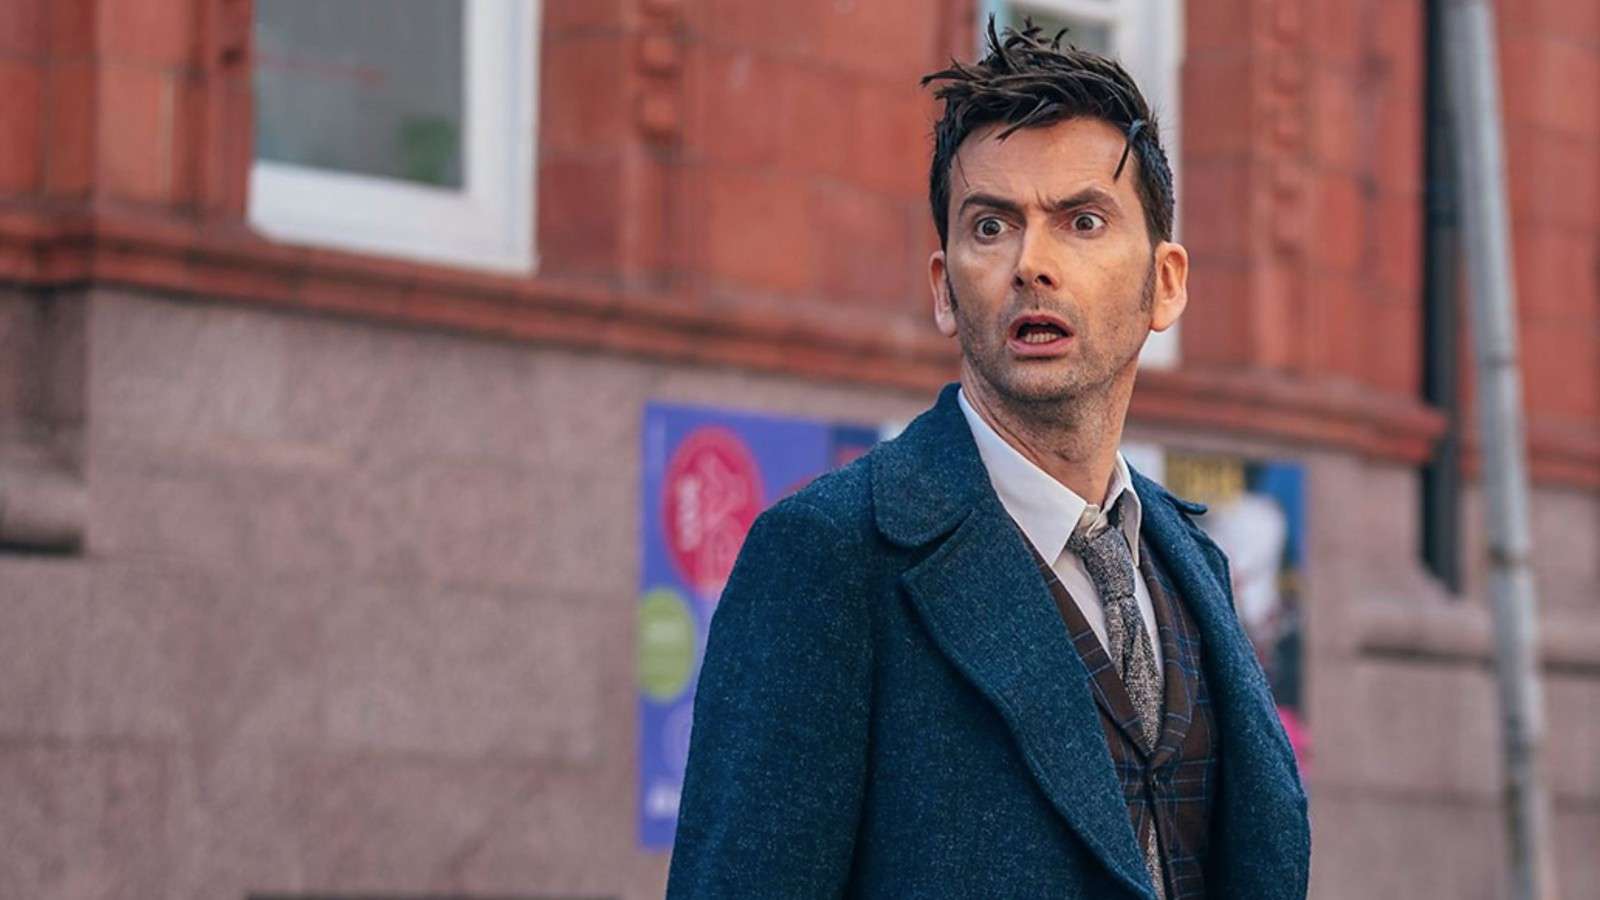 An image of David Tennant as the Fourteenth Doctor in the upcoming Doctor Who 60th anniversary specials.